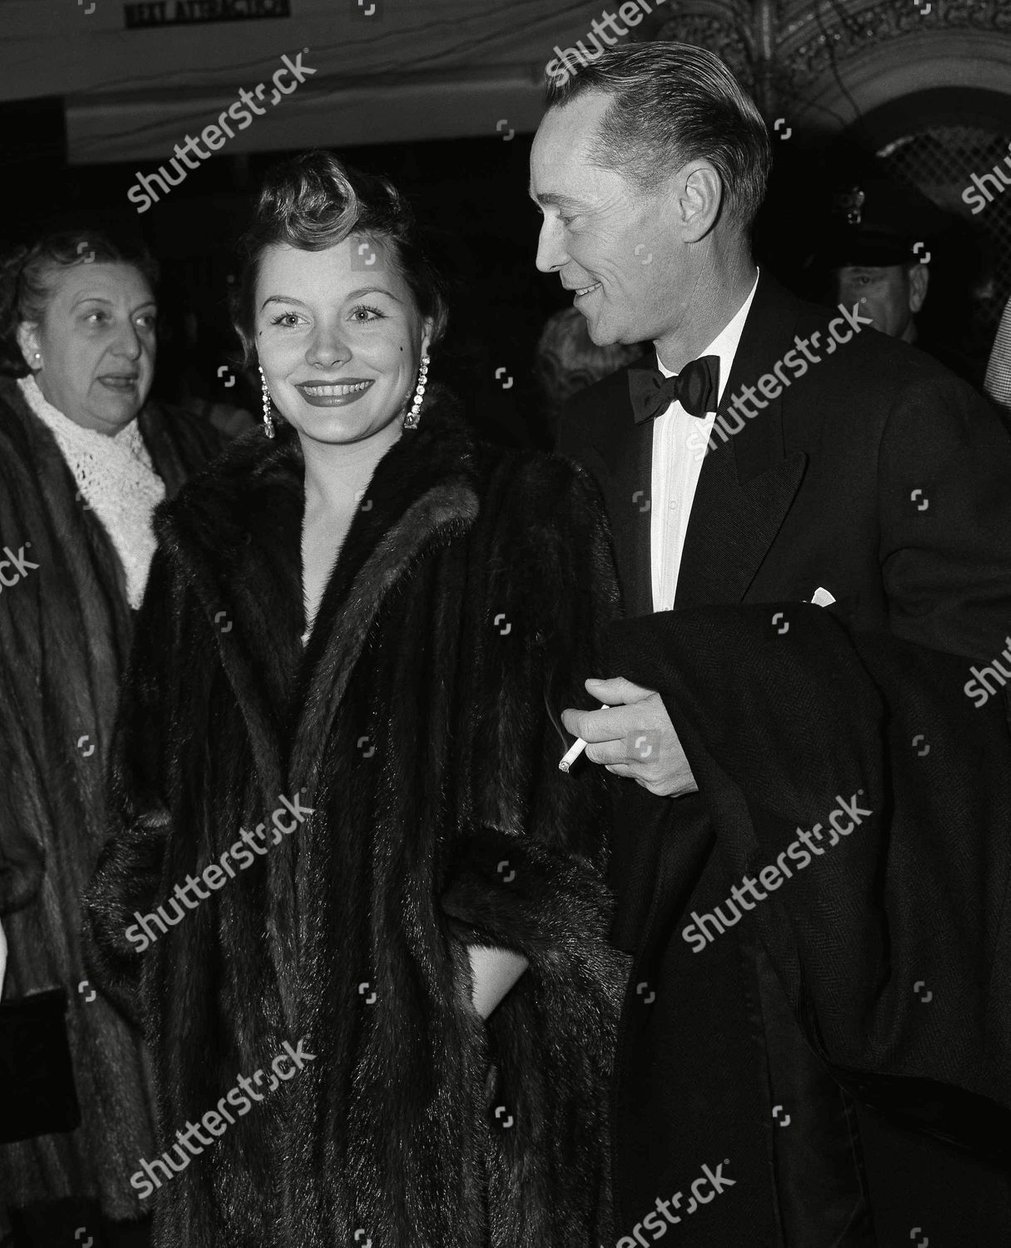 https://editorial01.shutterstock.com/wm-preview-1500/6629816a/d05a7ce2/franchot-tone-and-barbara-payton-los-angeles-usa-shutterstock-editorial-6629816a.jpg